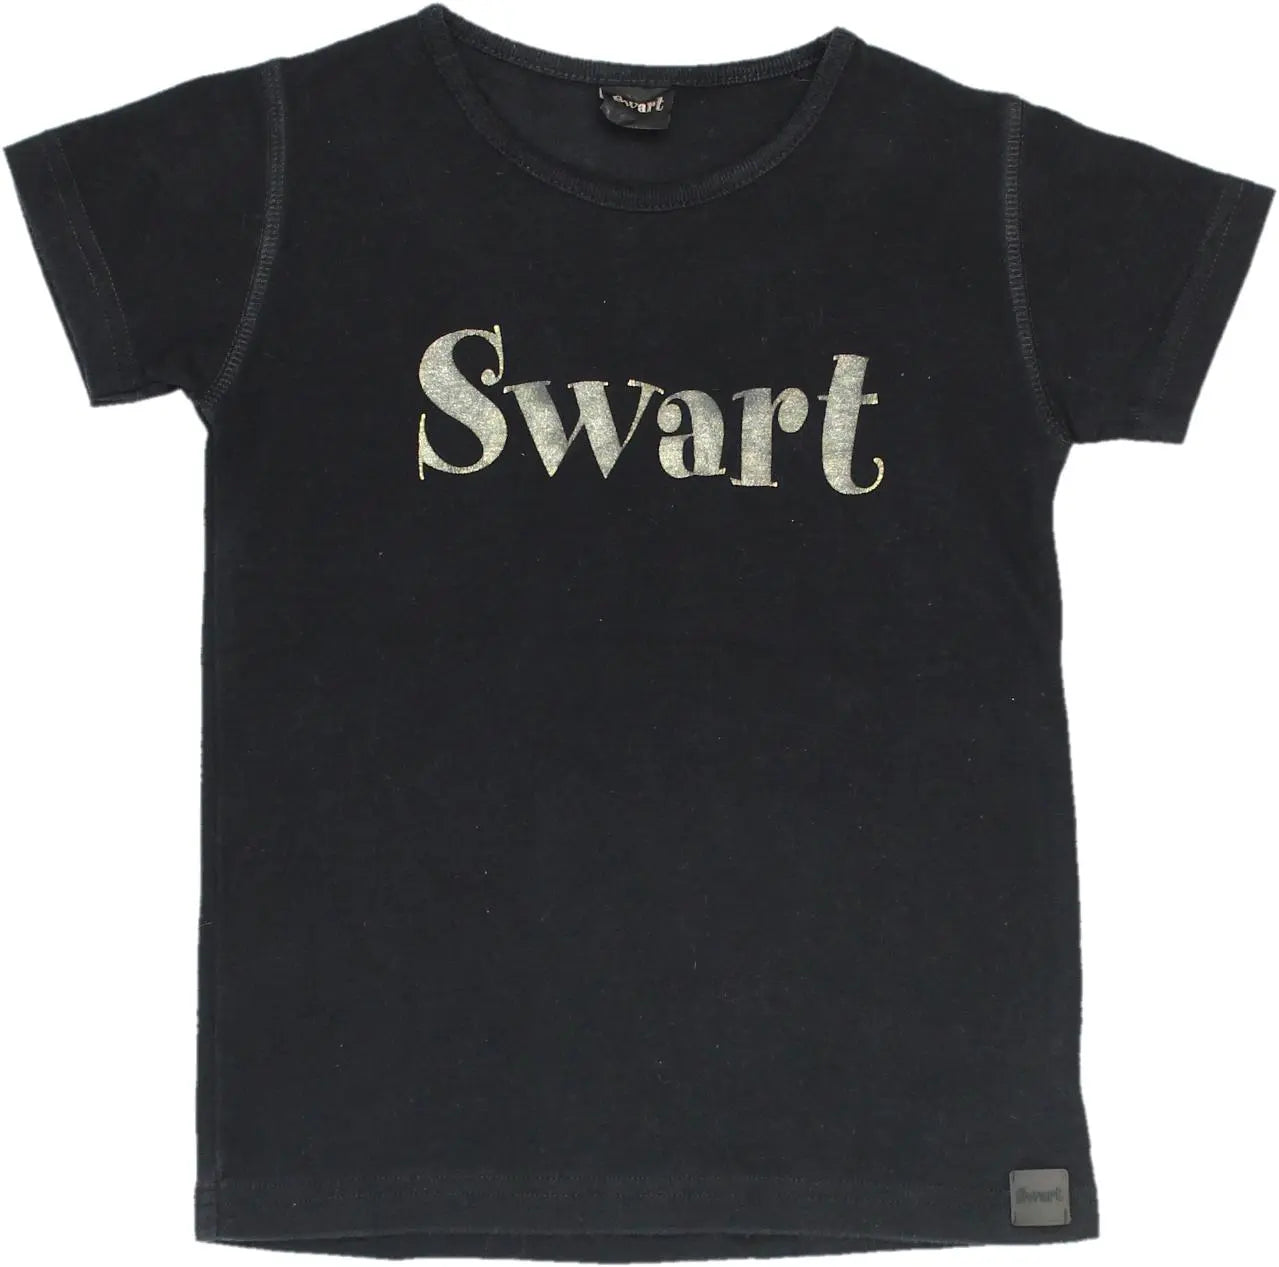 Swart - BLUE14000- ThriftTale.com - Vintage and second handclothing